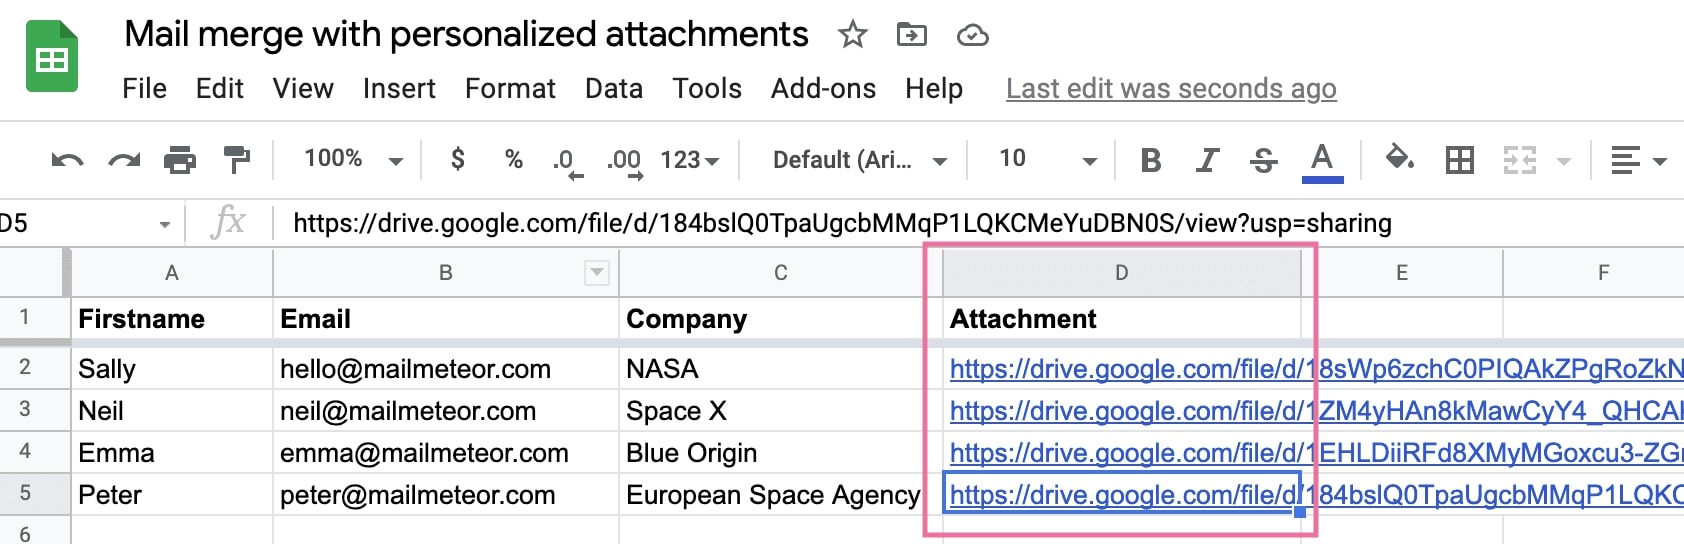 Mail merge with attachments in Google Sheets